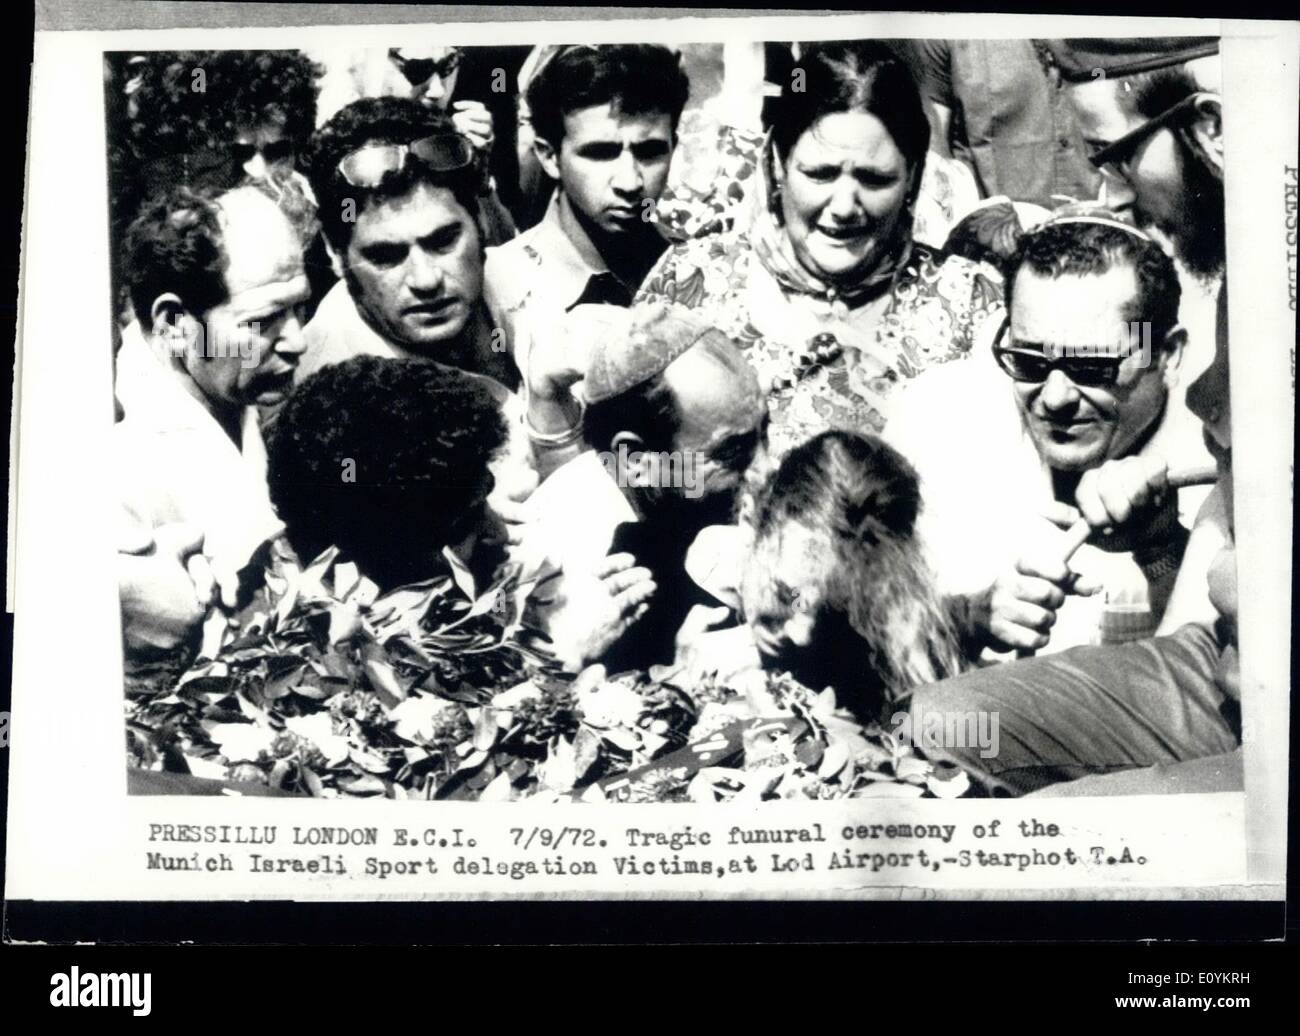 Sep. 09, 1970 - Bodies of Victims Of Olympic Massacre Flown Home To Israel; Photo shows A picture if grief at Lyyda Airport yesterday, after the bodies of 10 Israeli victims of the Munich Olympic massacre were flown home yesterday from Munich.Tragic funeral ceremony of the Munich Israeli Sport Delegation Victims, at Lord Airport. Stock Photo